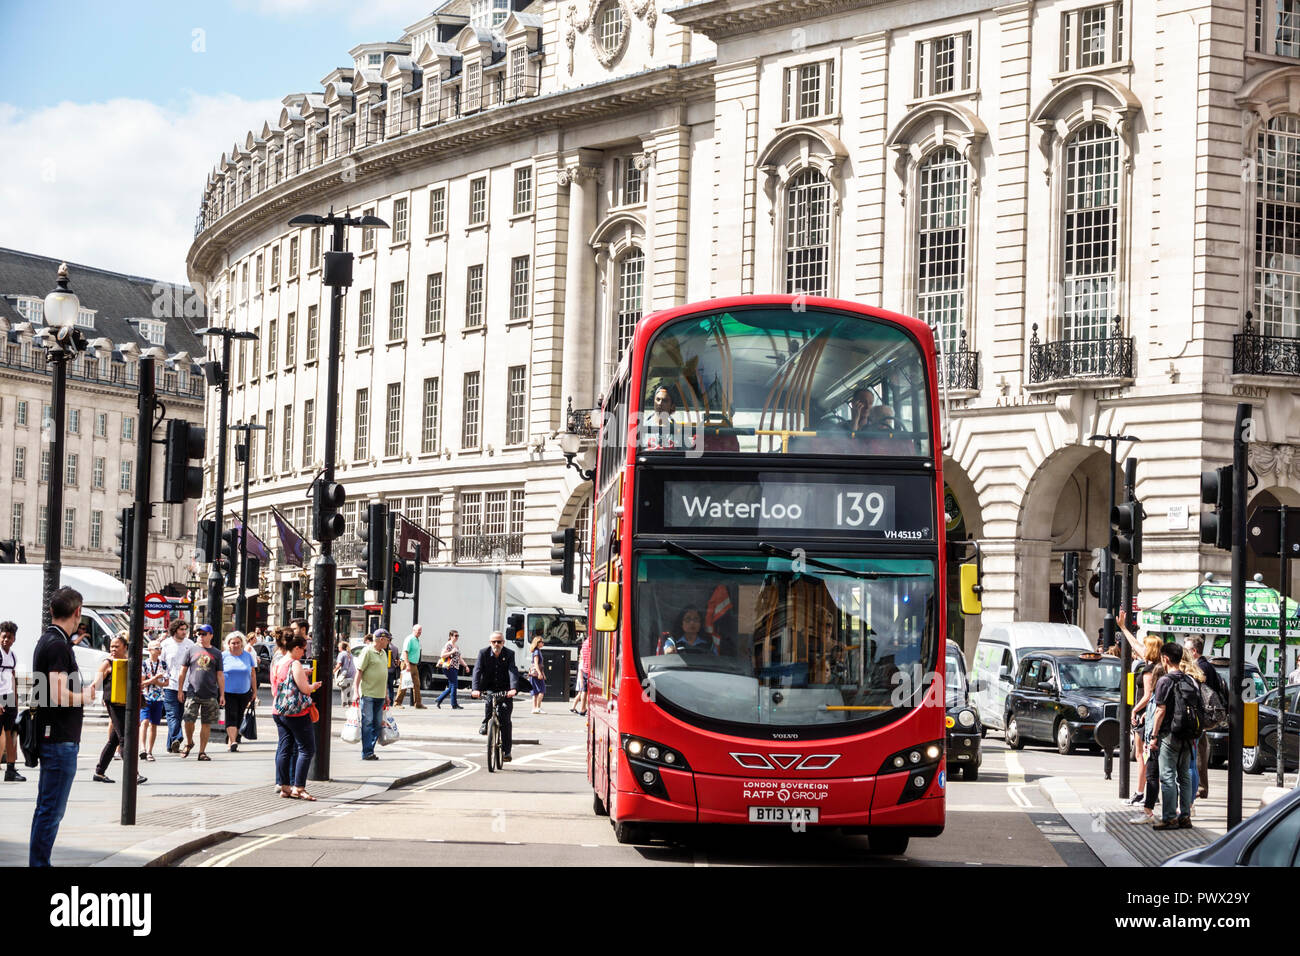 Londra Inghilterra,Regno Unito,West End Piccadilly Circus,St James's, Regent Street, autobus a due piani rosso, pedoni, GB inglese Europa, UK180821024 Foto Stock